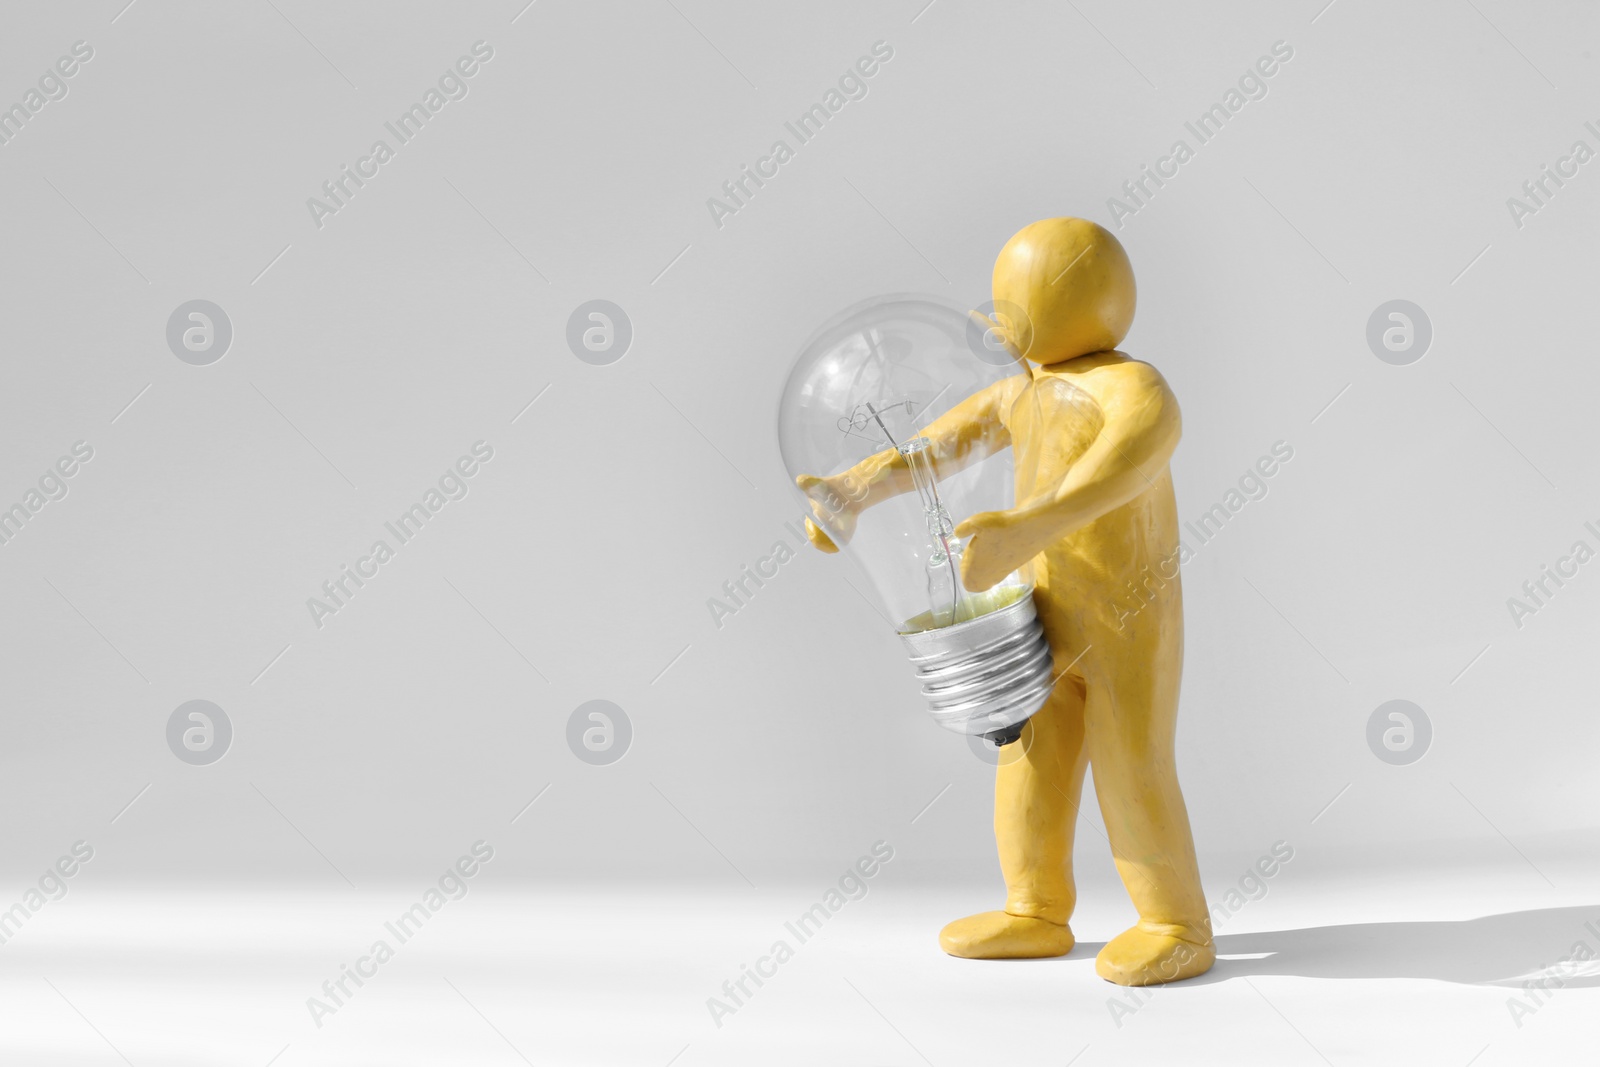 Photo of Human figure made of plasticine holding light bulb on white background. Space for text